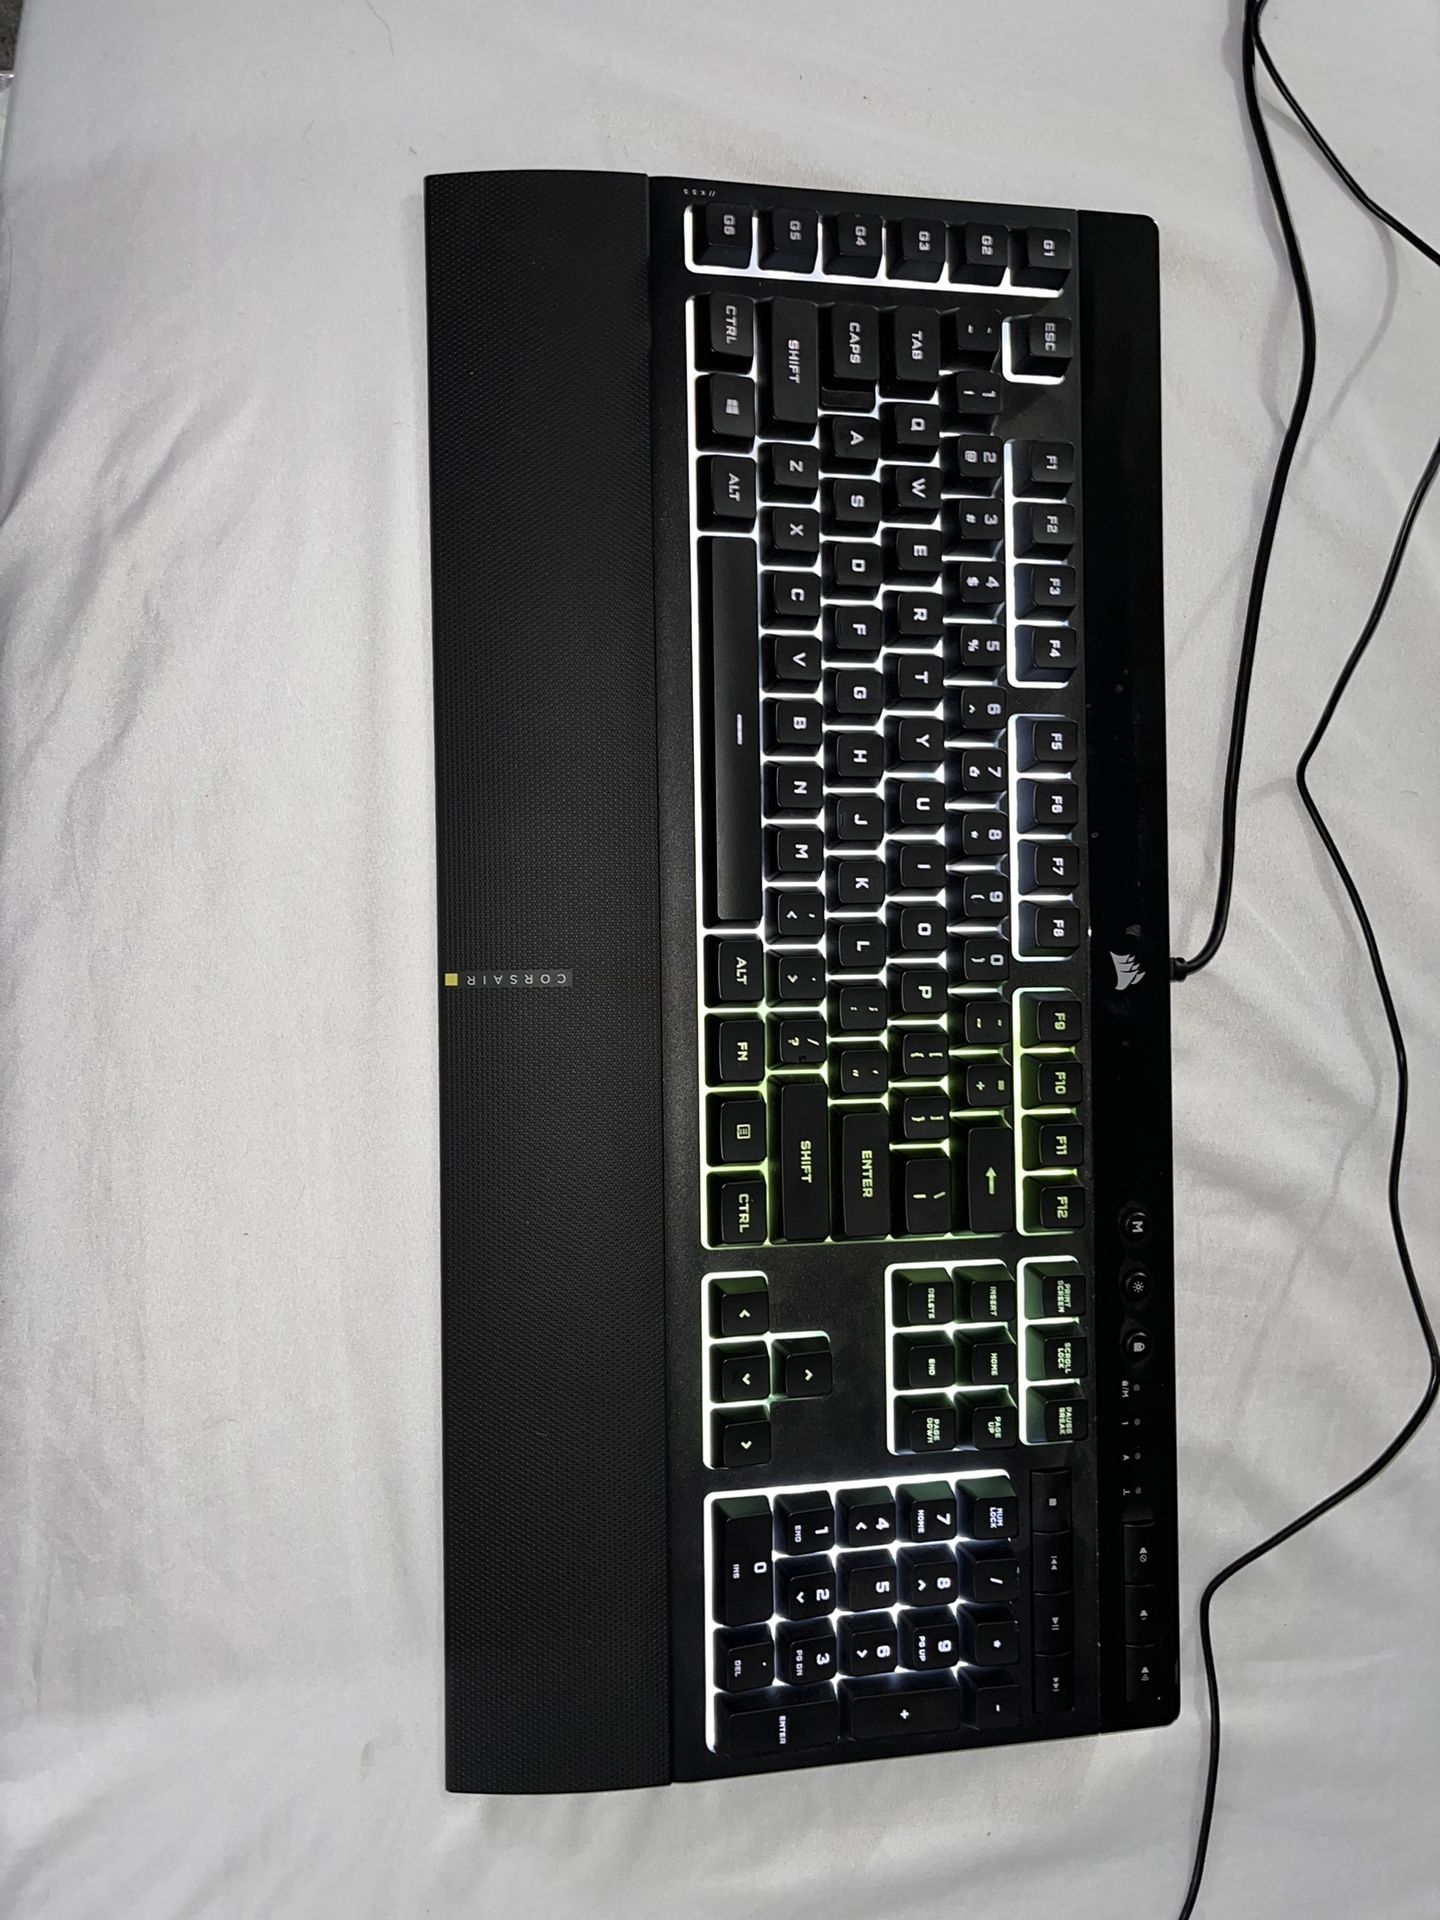 Gaming keyboard and mouse 